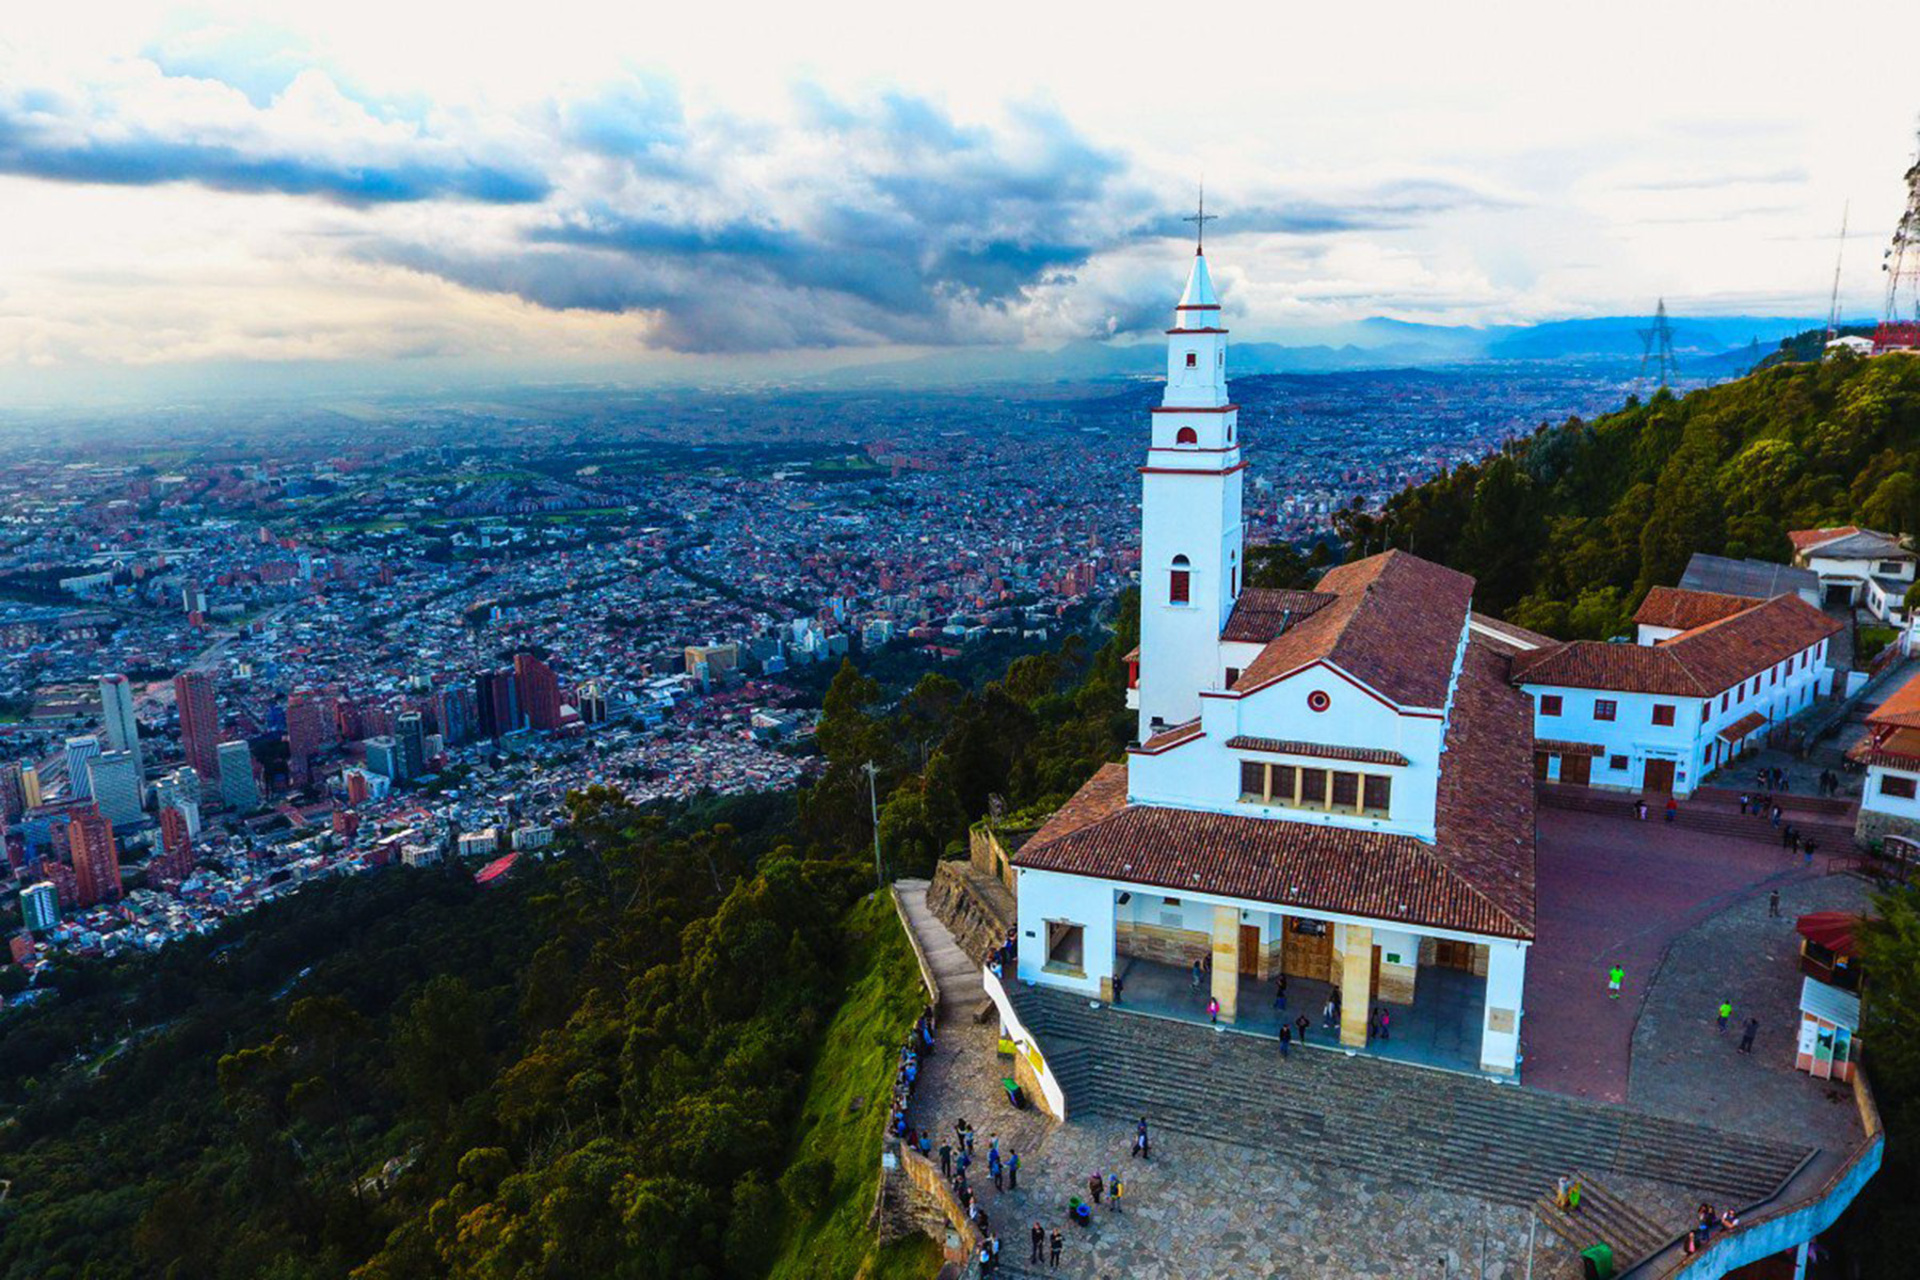 Colombia’s 3 Axis of Diversity: Bogotá, Coffee Region and Cartagena 8-Day Tour